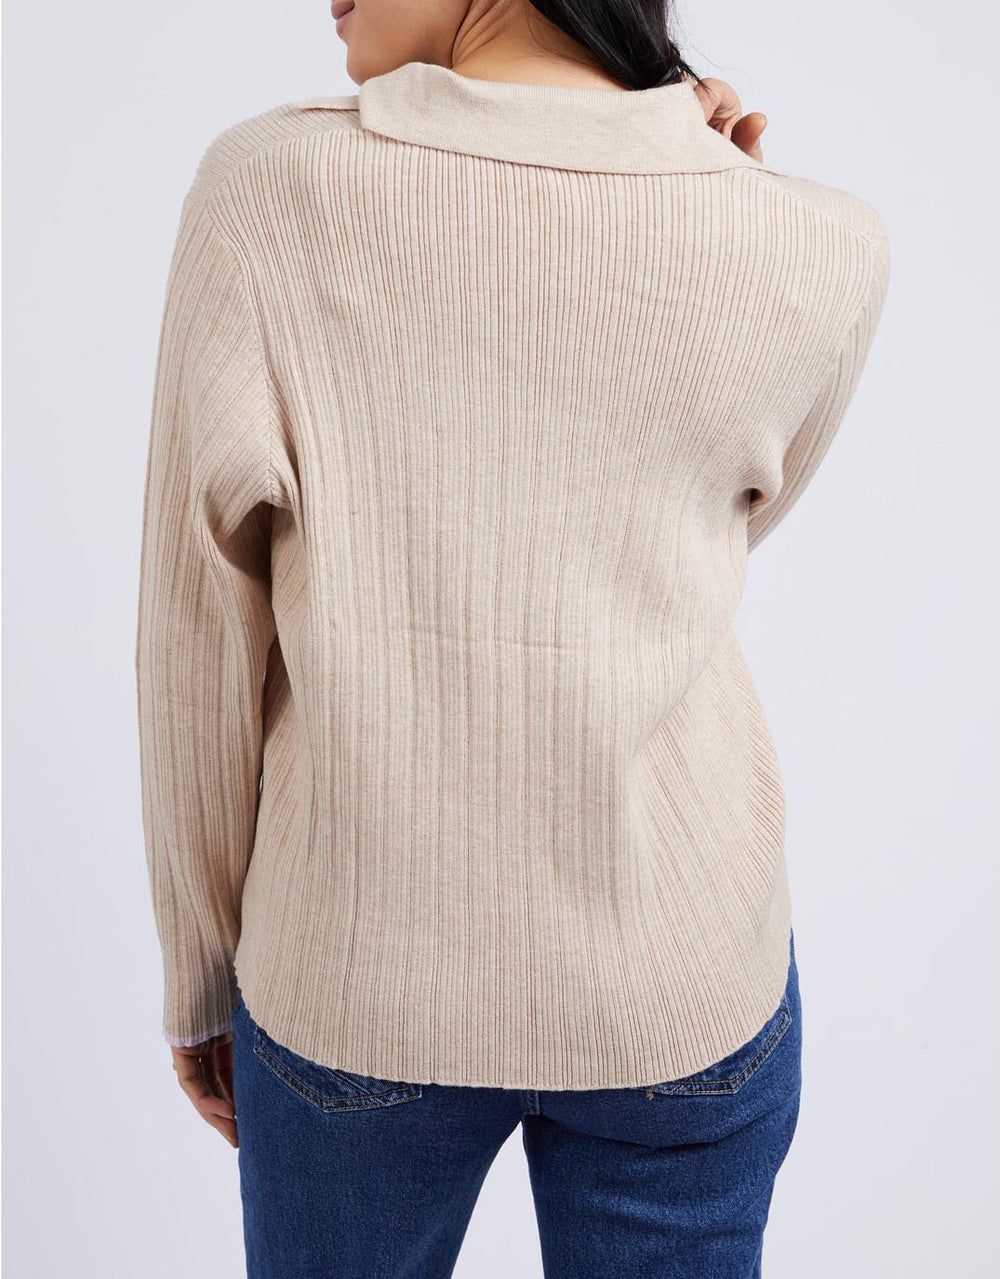 elm-maple-open-collar-knit-oatmeal-womens-clothing